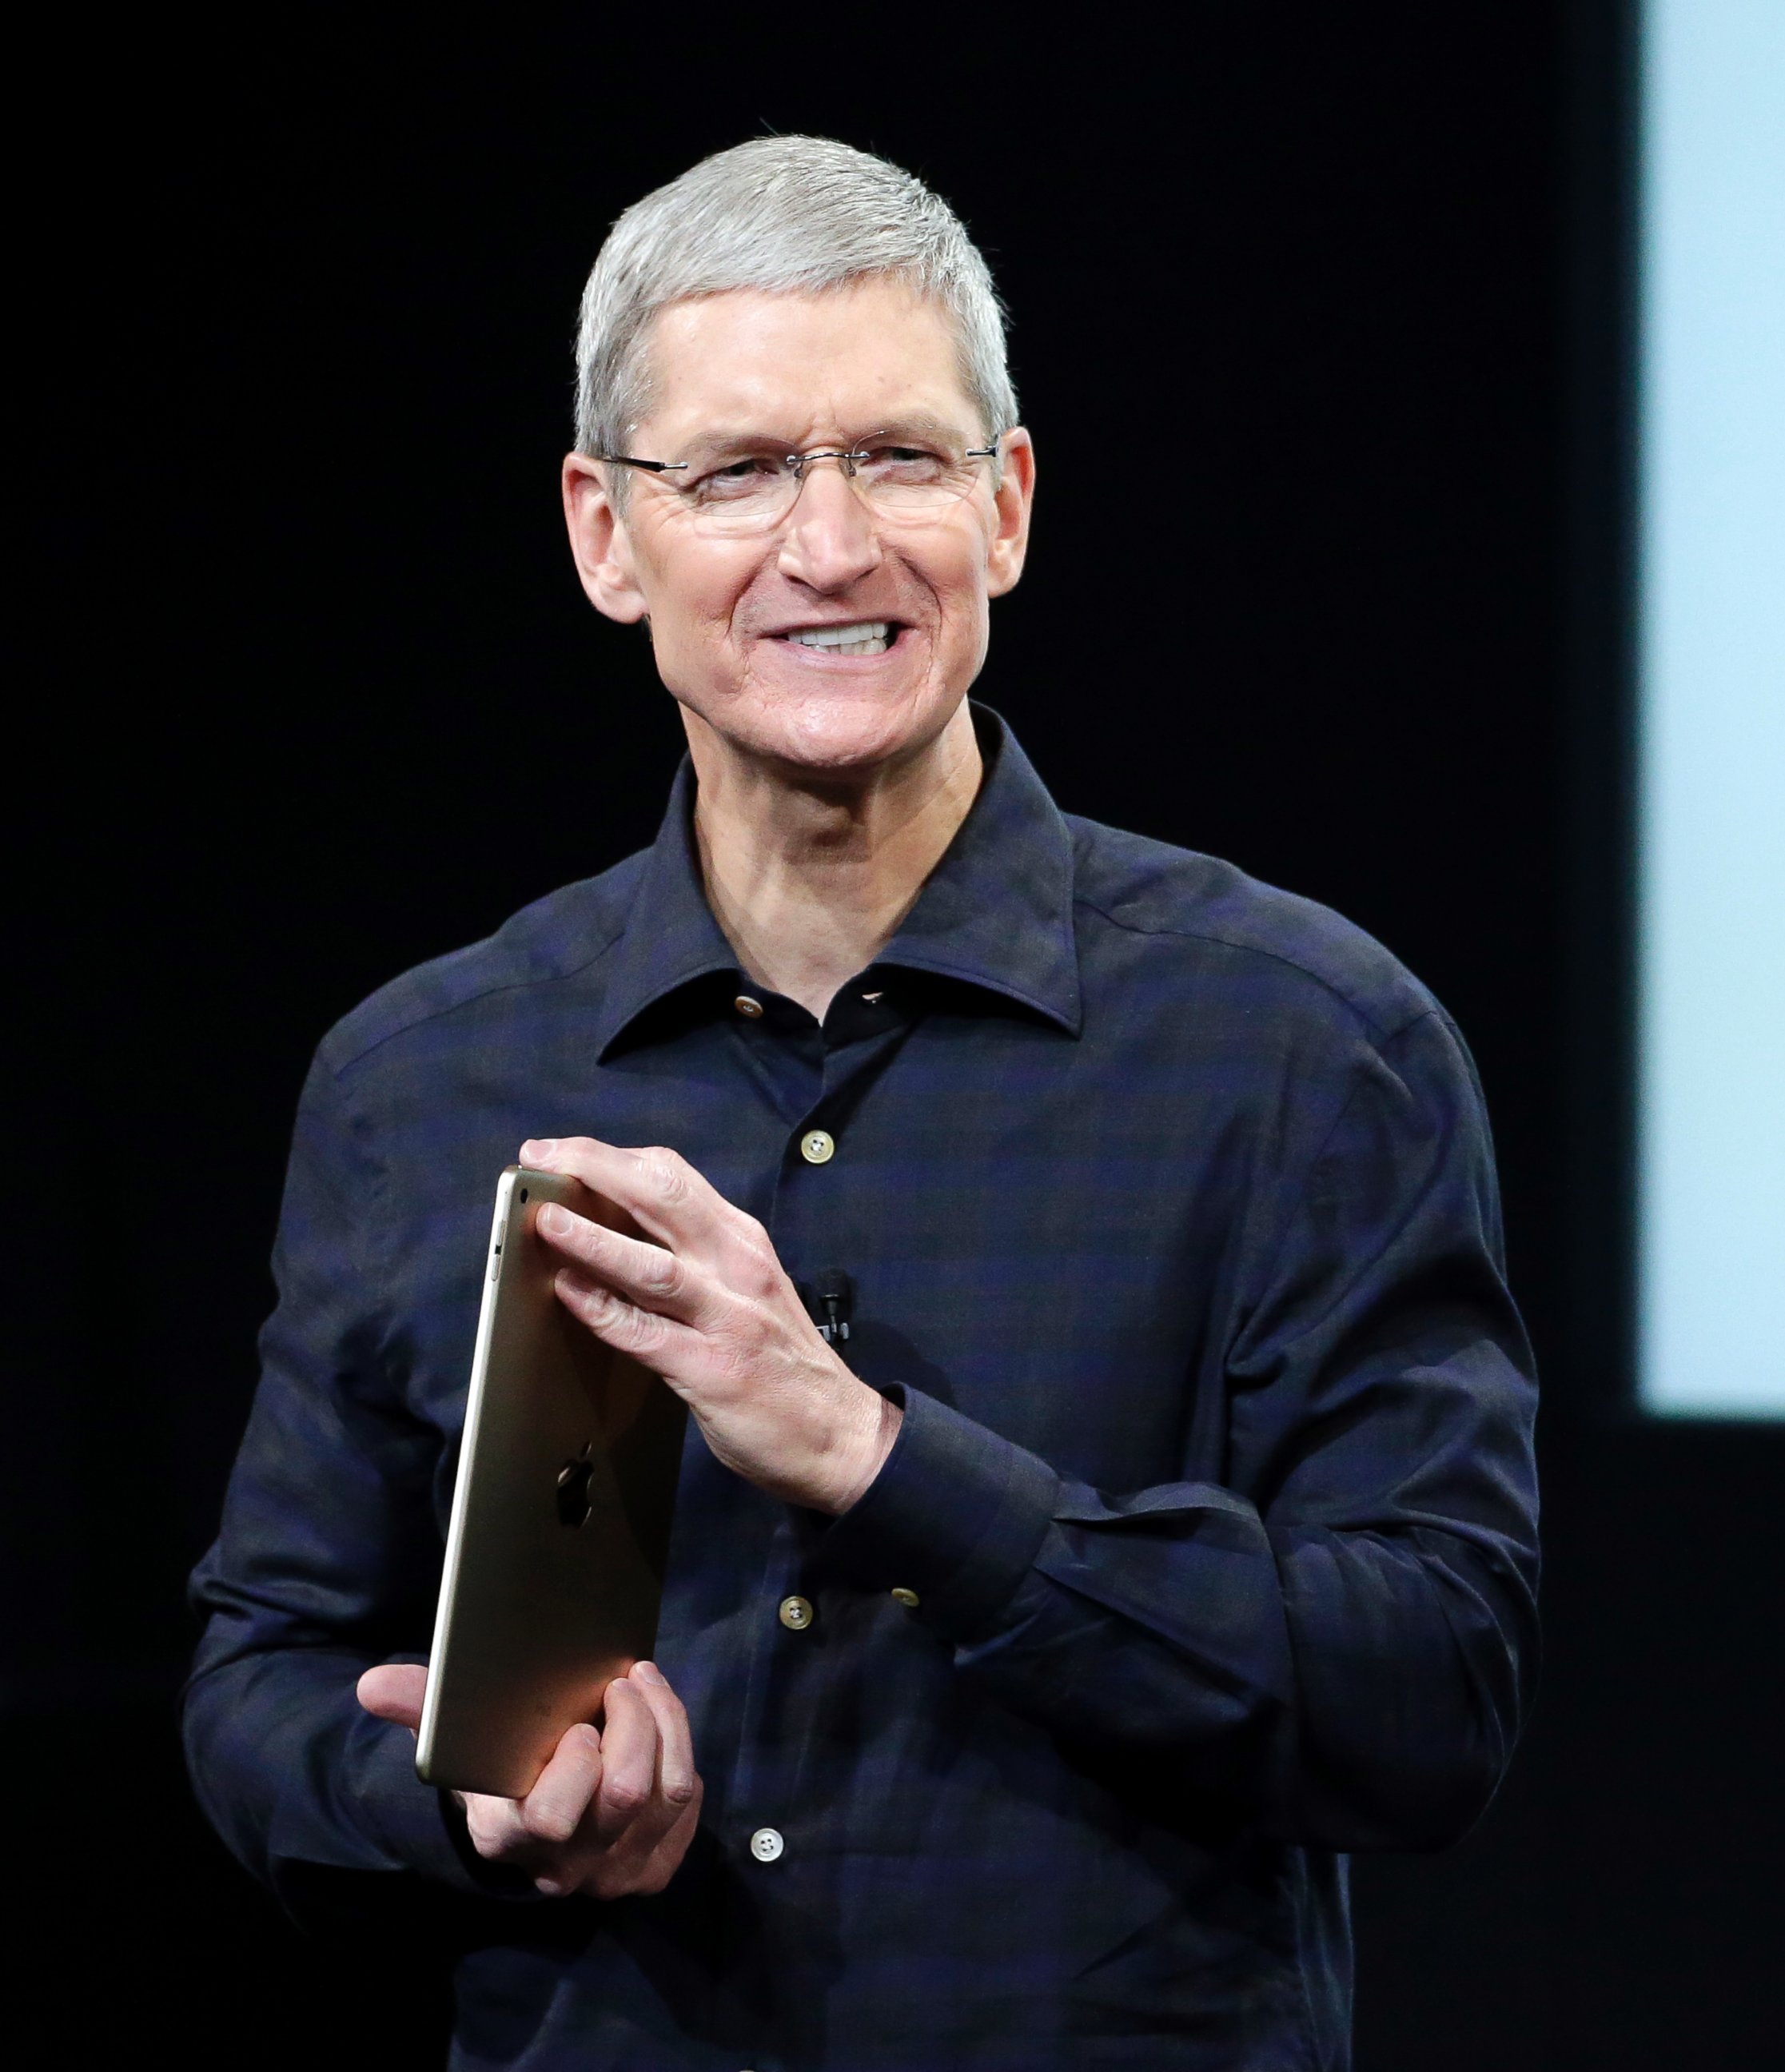 PHOTO: Apple CEO Tim Cook introduces the new Apple iPad Air 2 during an event at Apple headquarters on Oct. 16, 2014 in Cupertino, Calif.